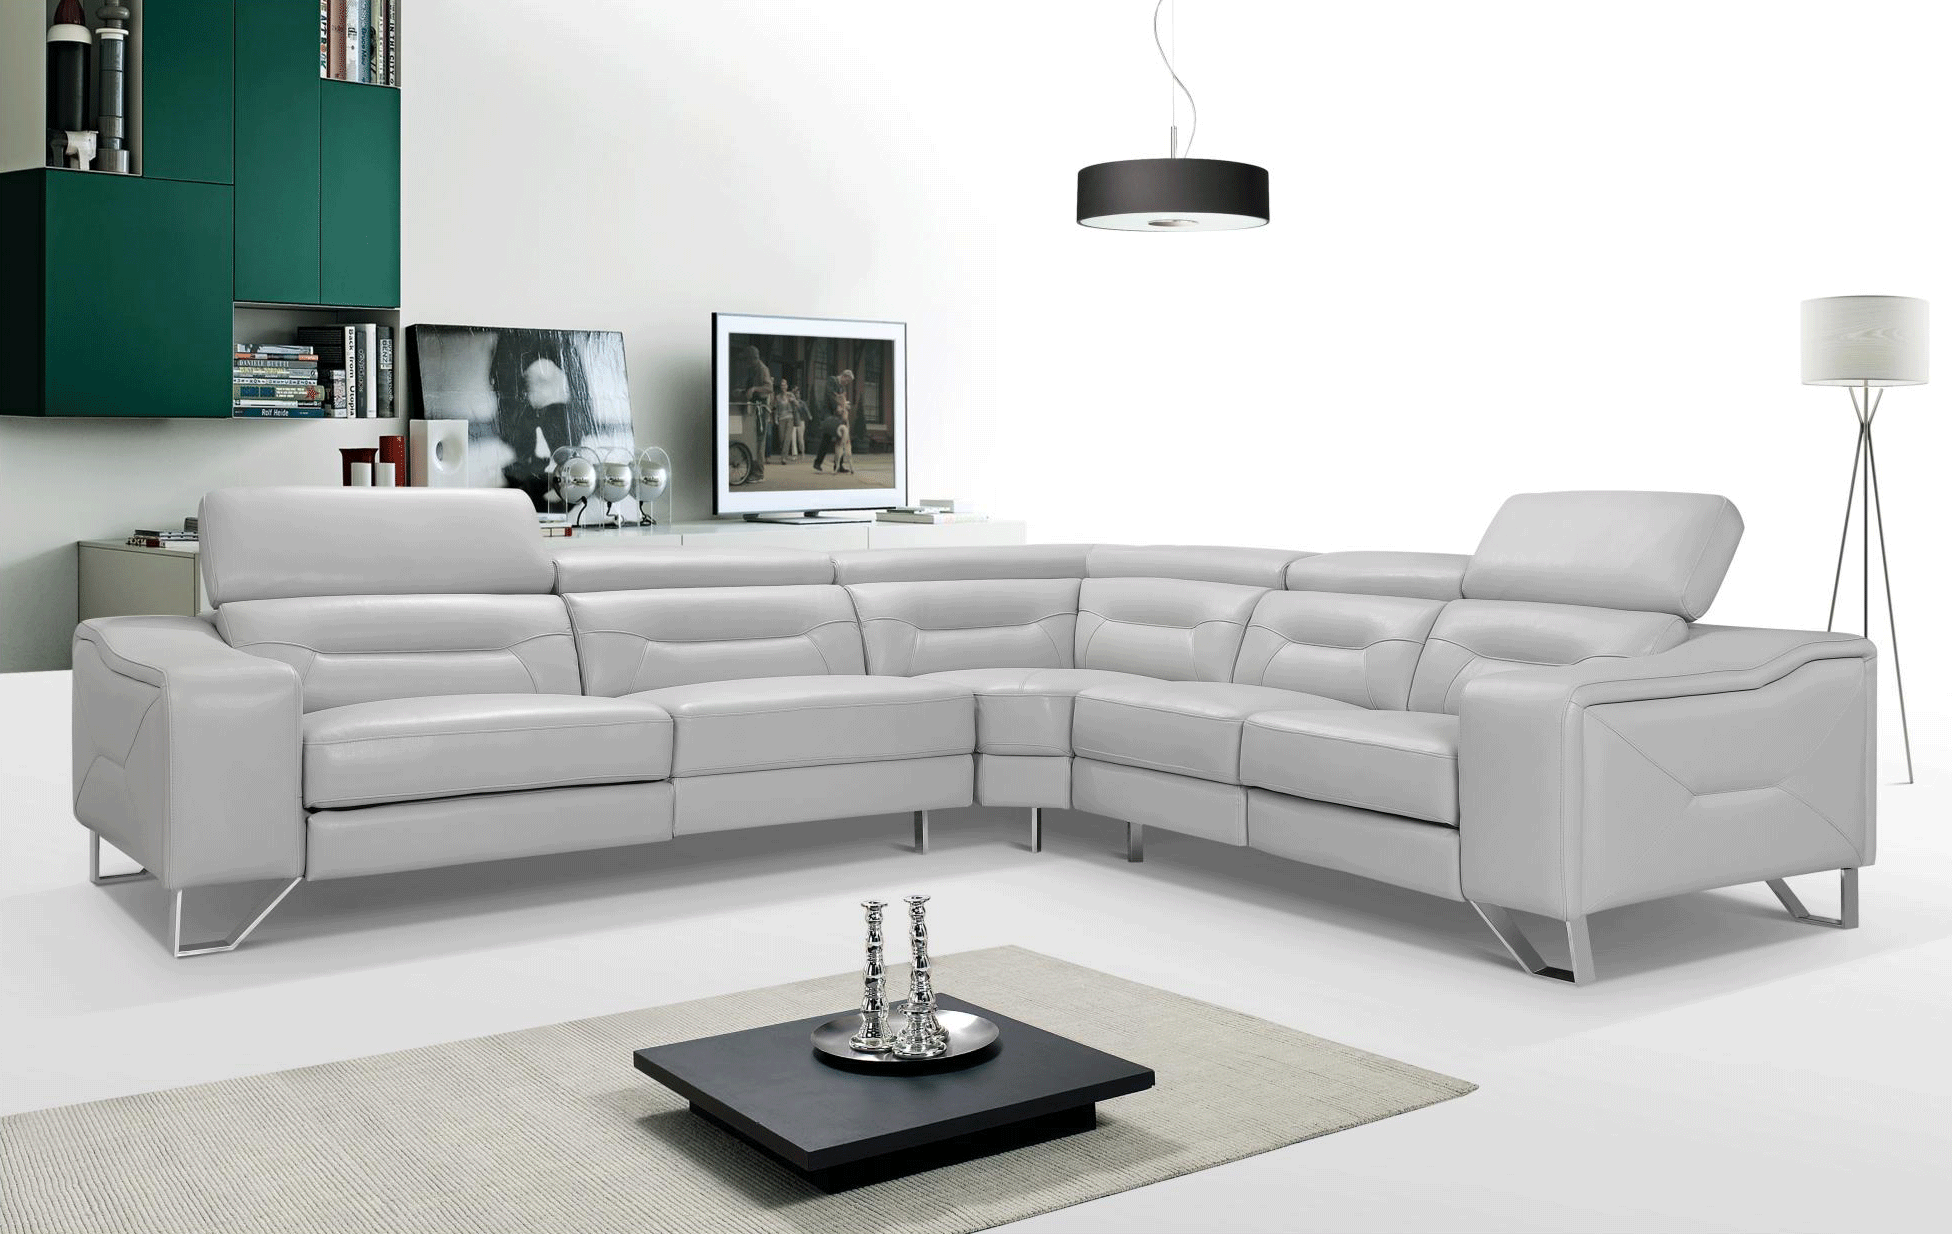 Brands ALF Capri Coffee Tables, Italy 2723 Sectional w/Recliners